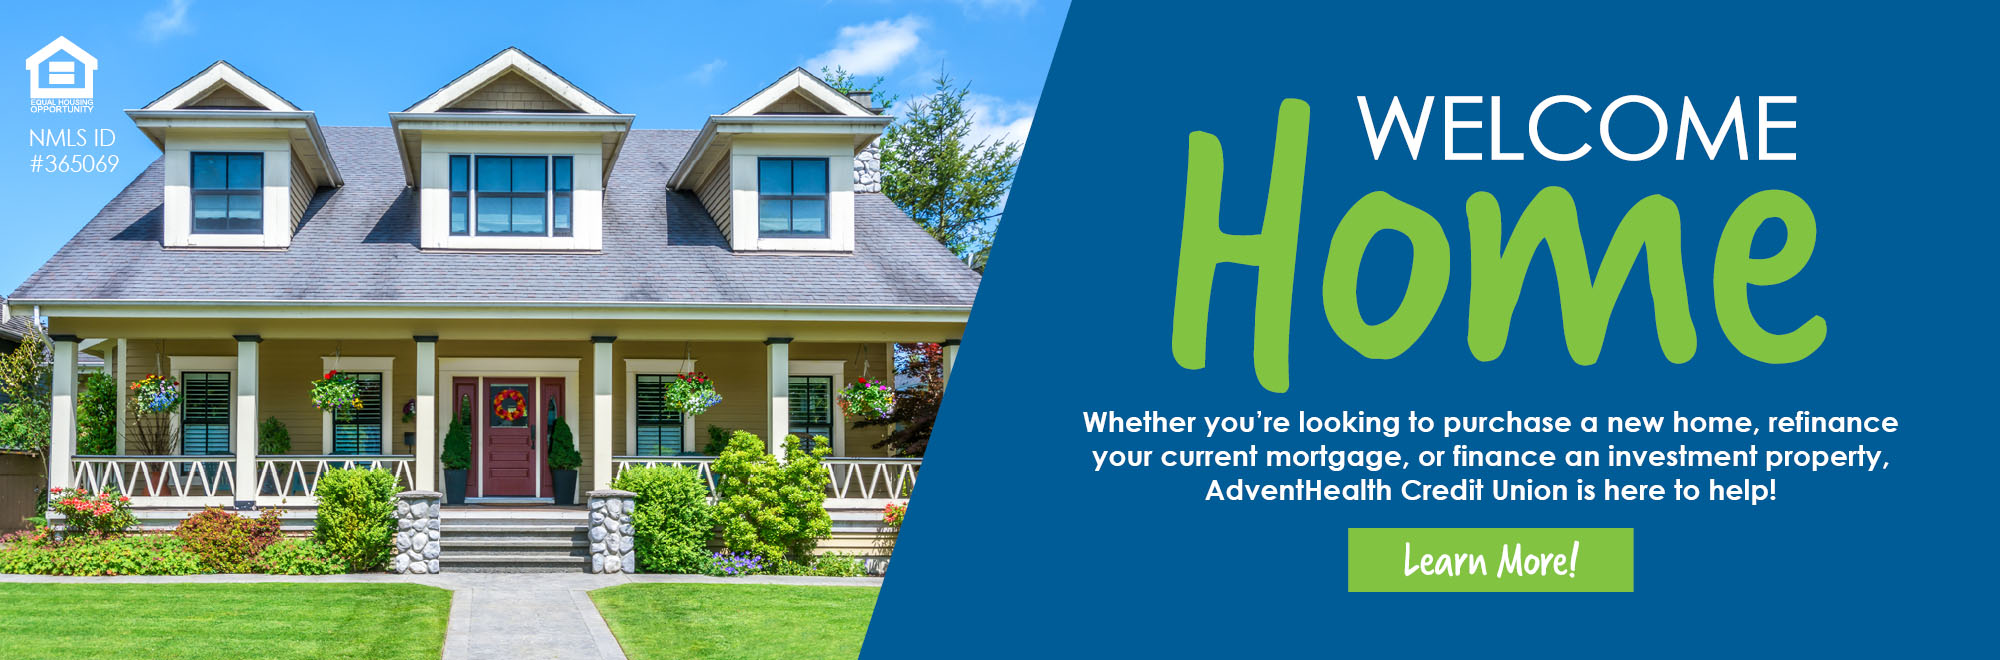 Looking to purchase a new home, refinance your mortgage, or finance an investment property? AdventHealth CU is here to help!